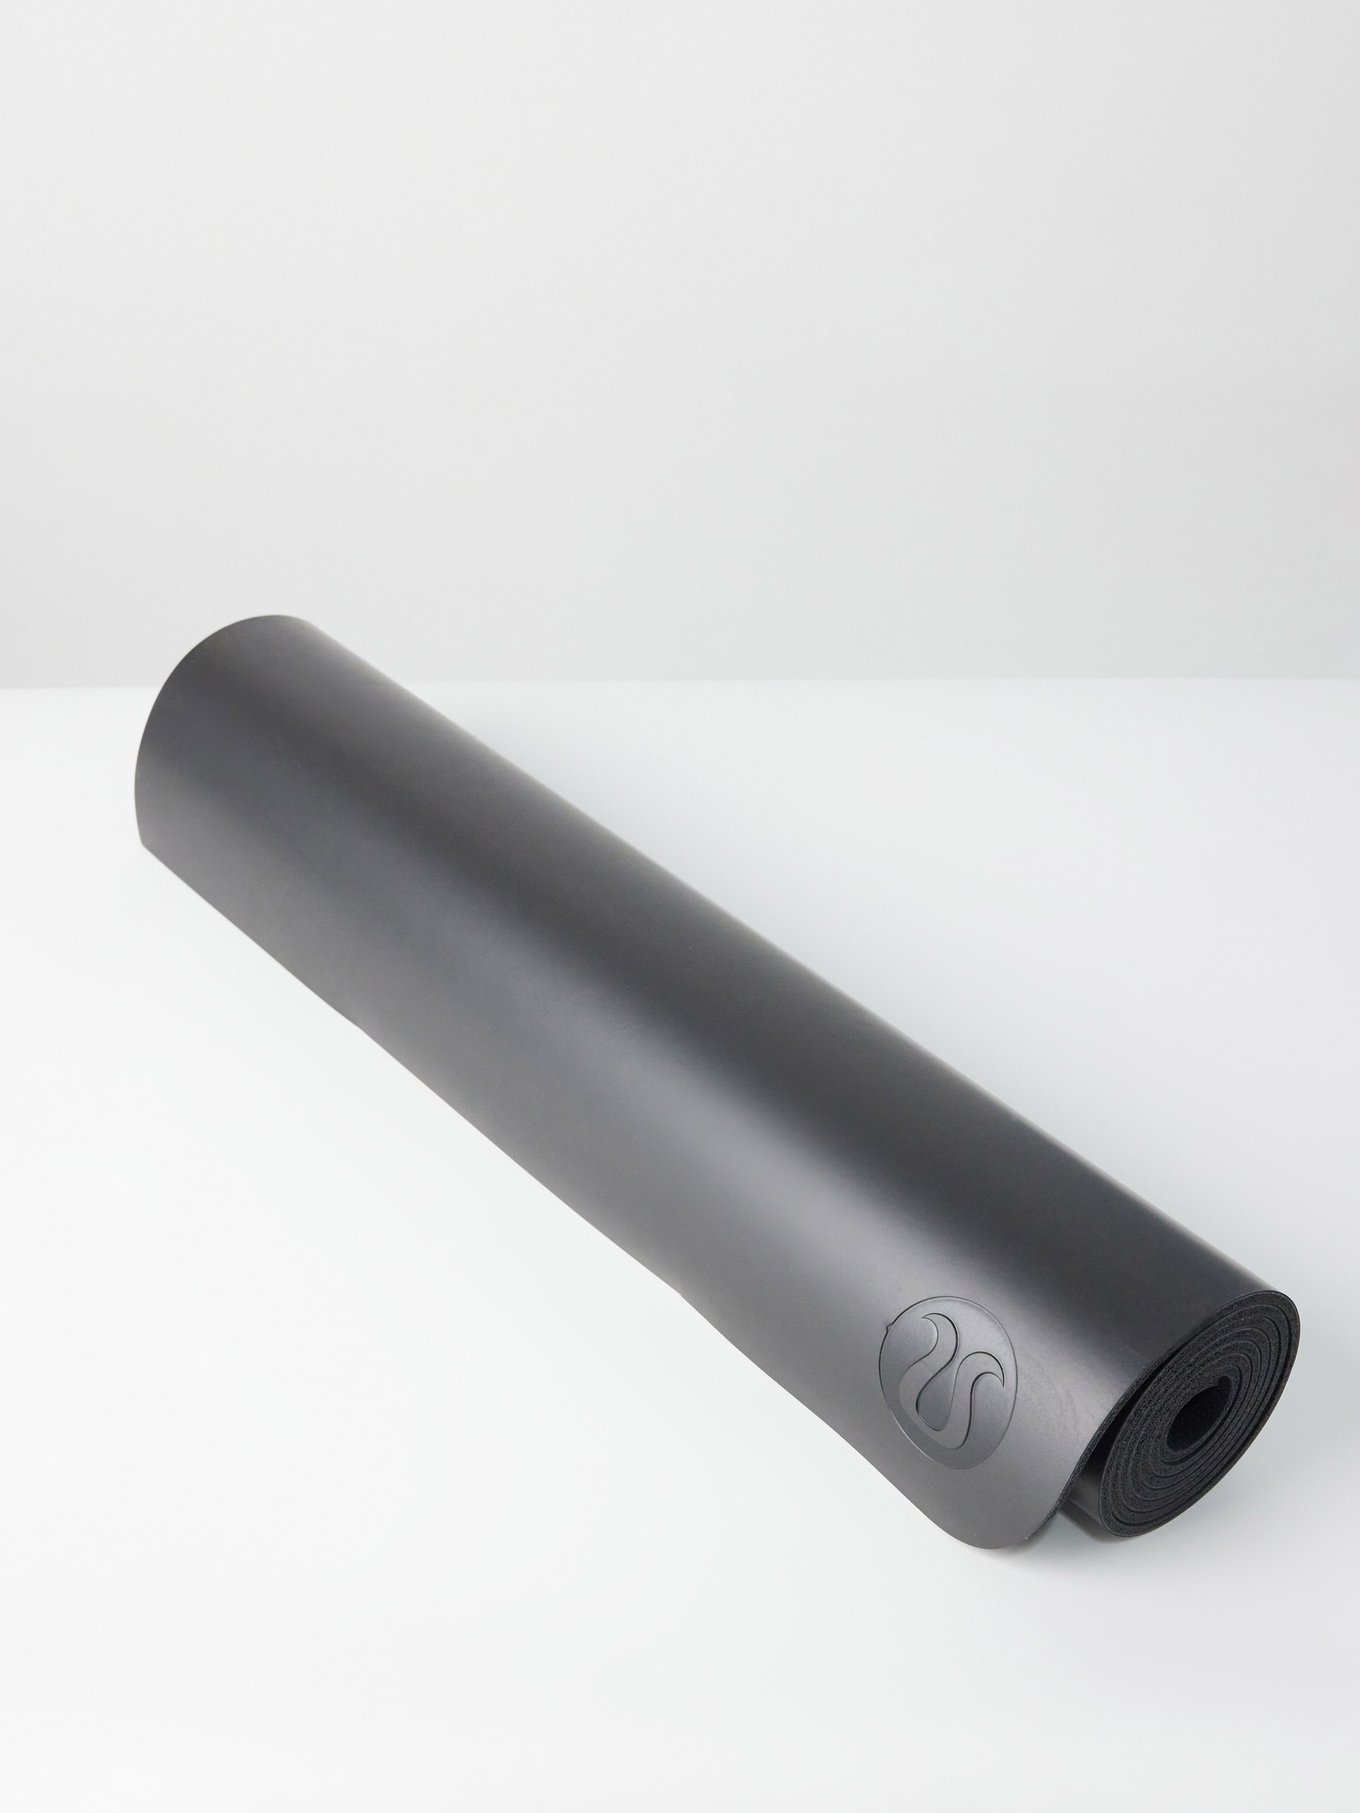 Take Form Yoga Mat 5mm Made With FSC™ Certified Rubber